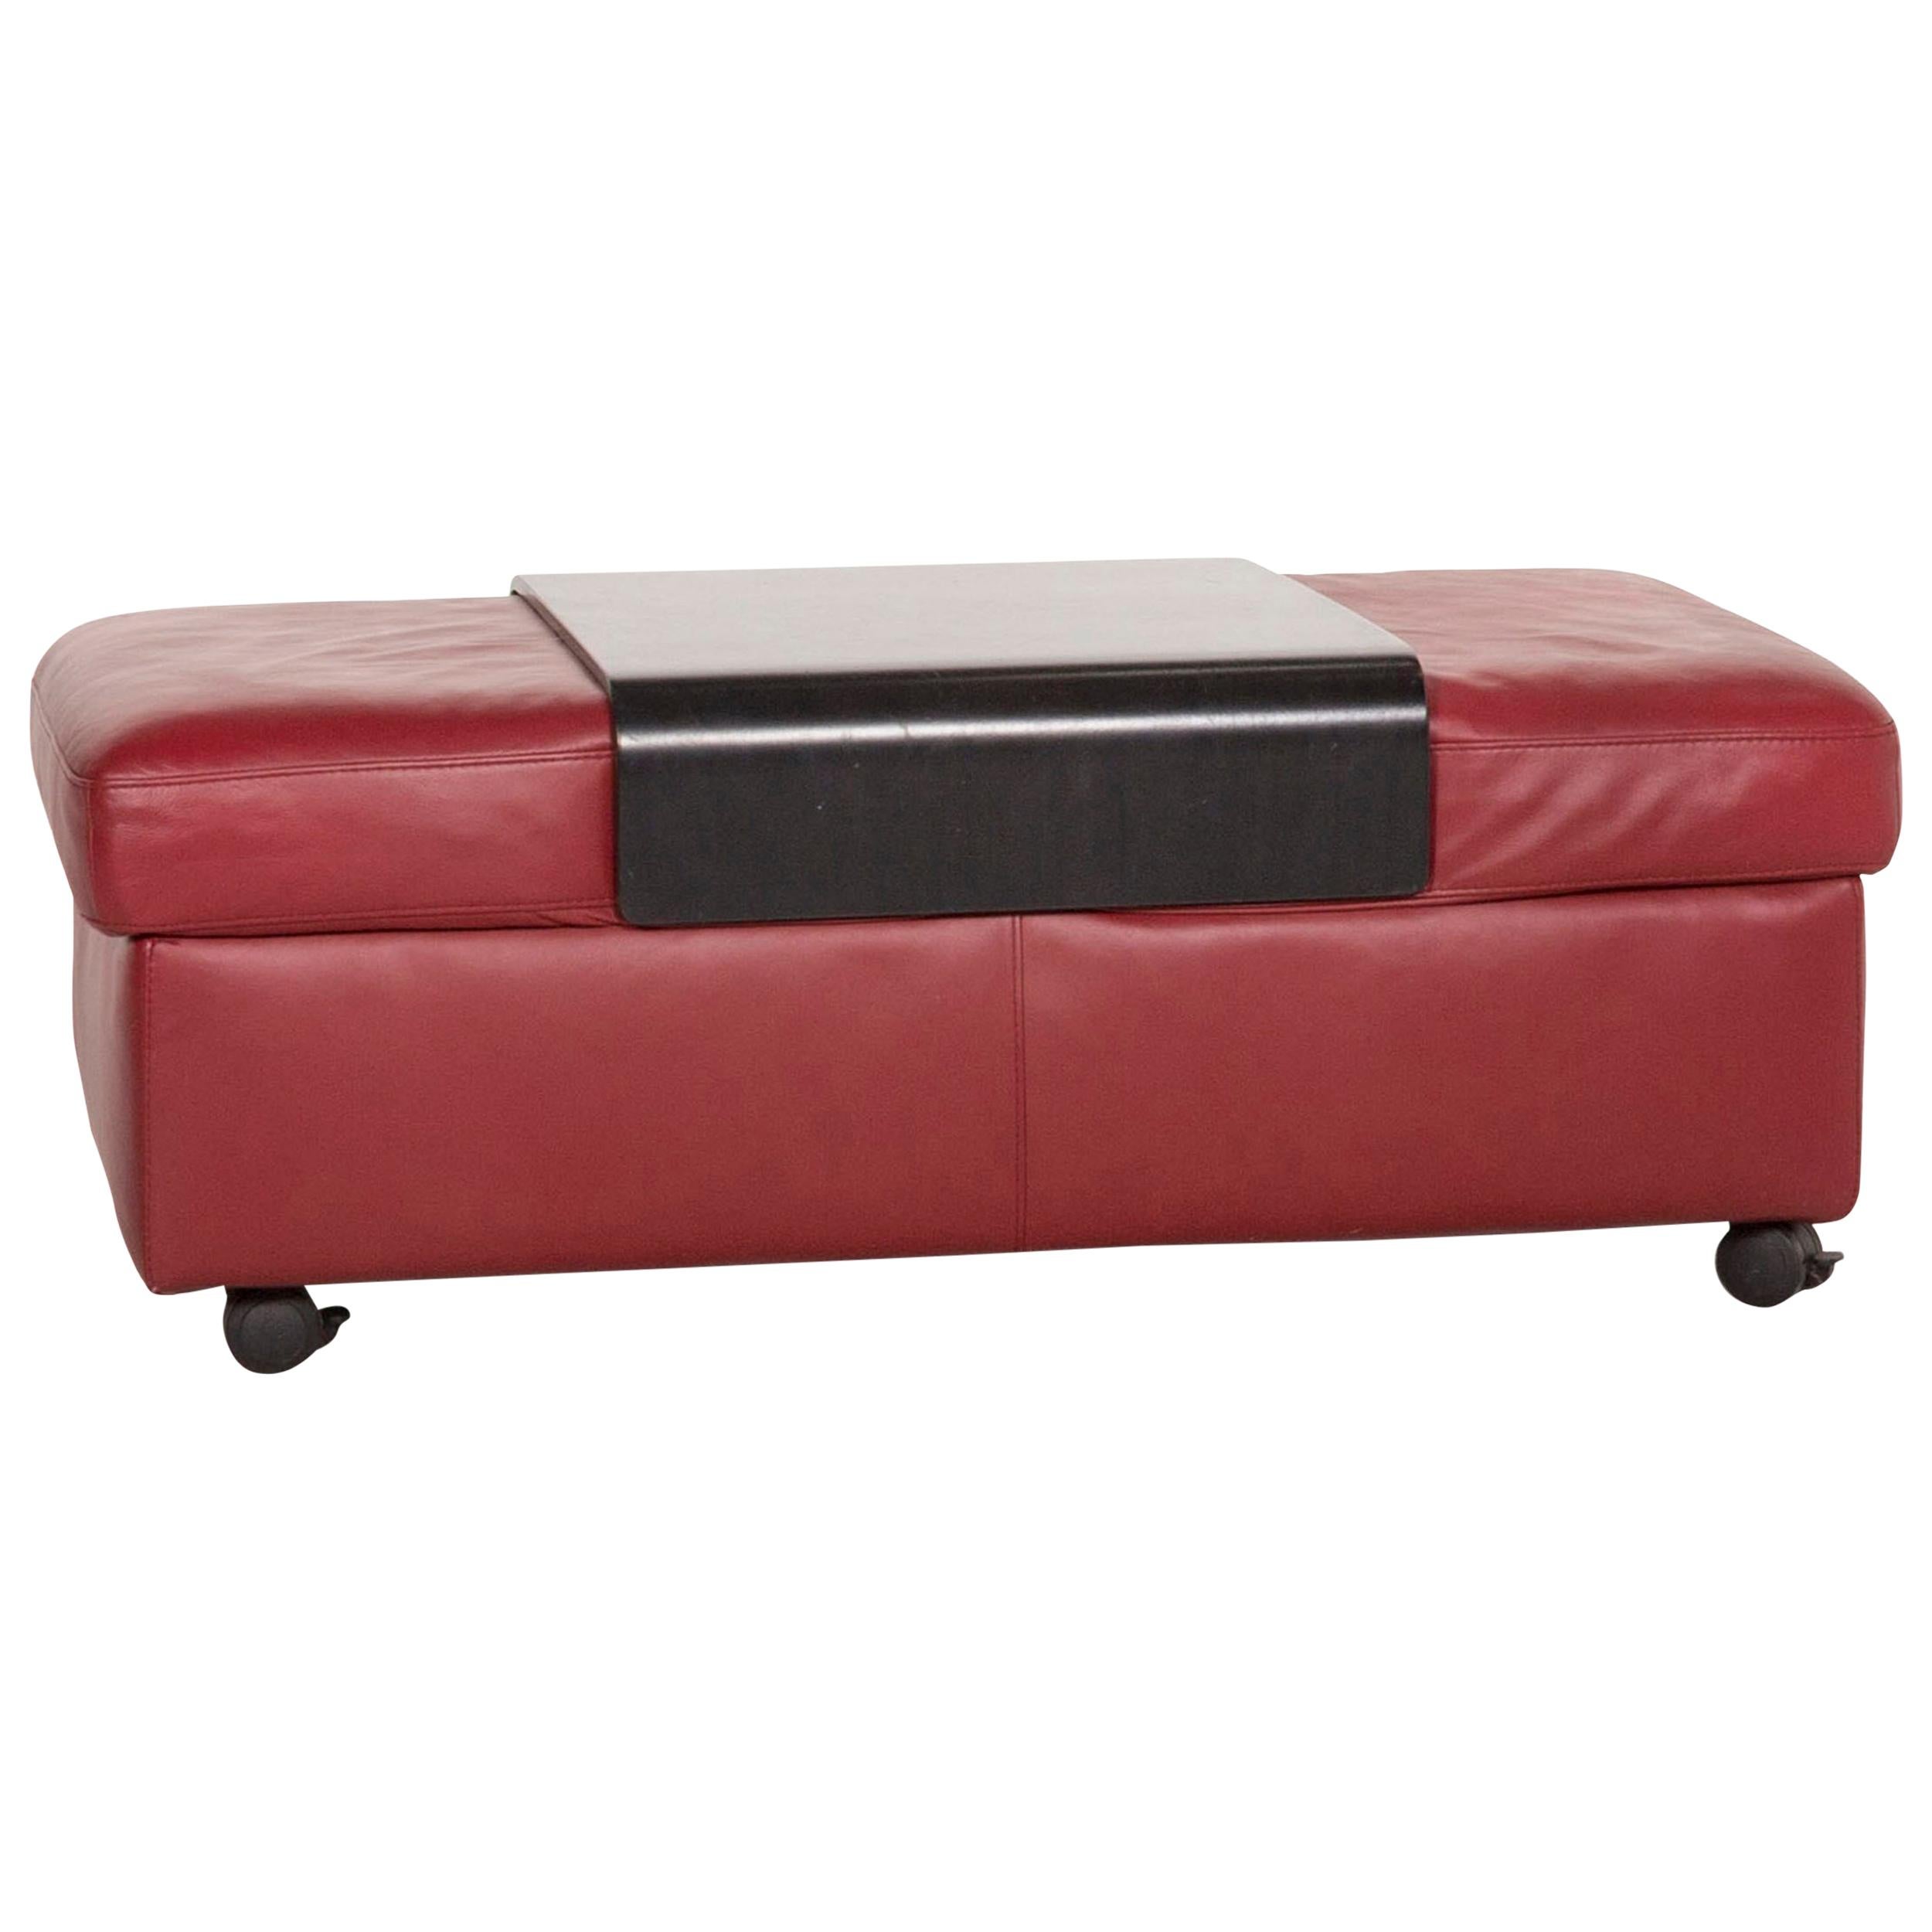 Stressless Arion Leather Stool Red Function